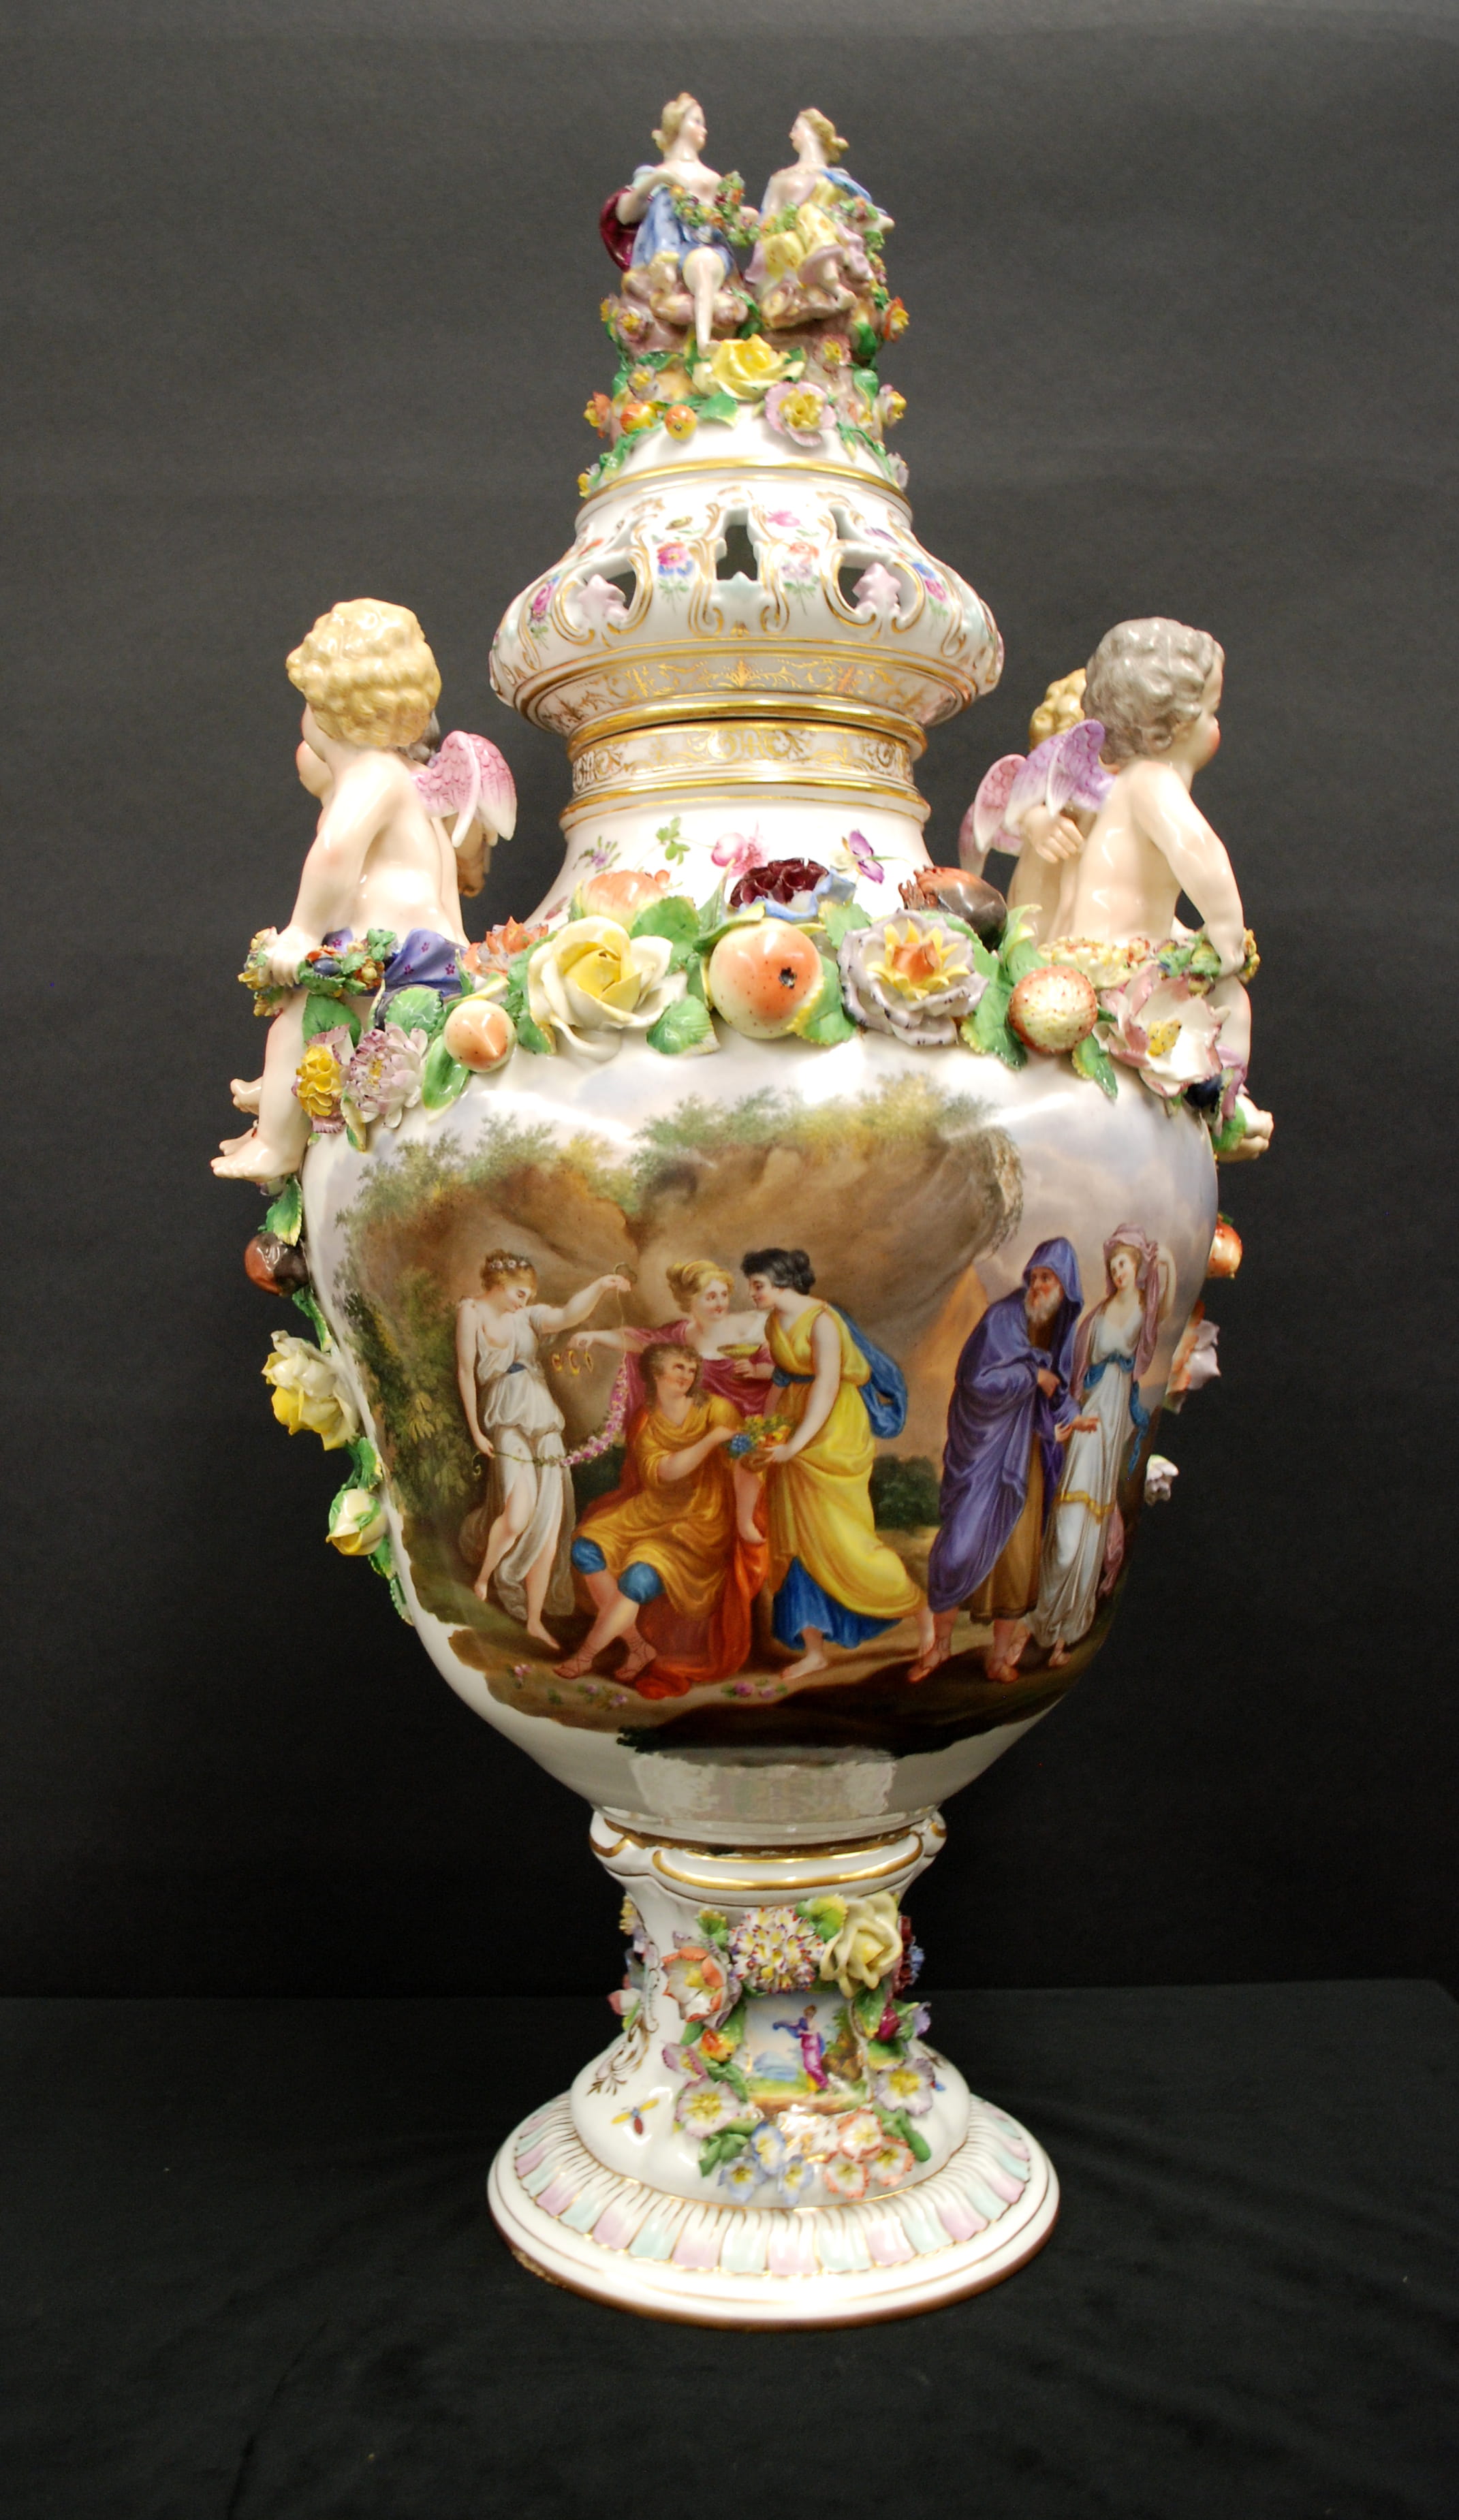 A close up of Drexel's Meissen imitation urn, which features several distinctly Meissen elements like crisply sculpted fruits, the sprays of flowers and small details such as bugs or a single flower.